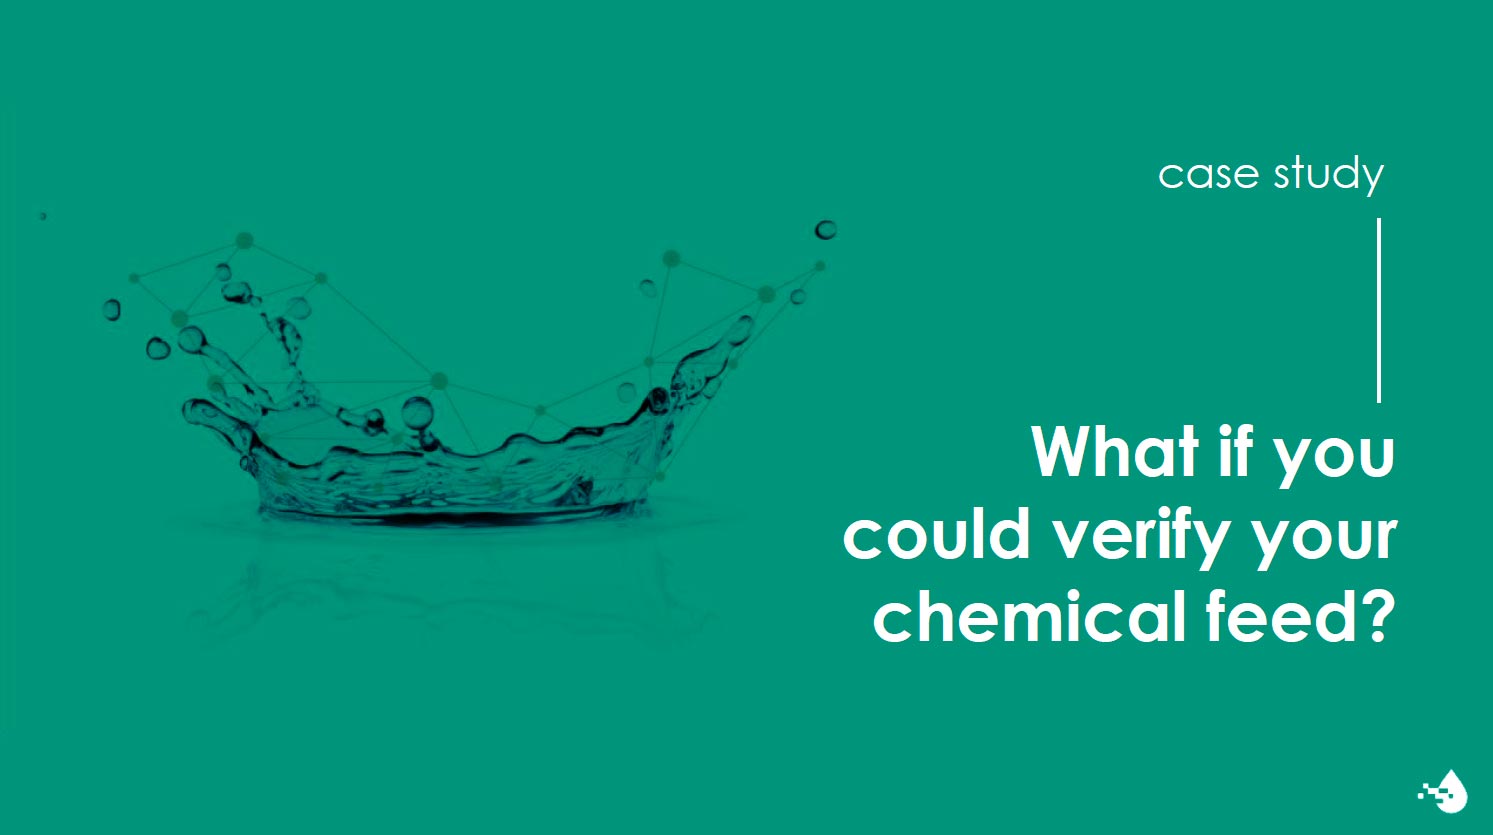 Image: What if you could verify your chemical feed